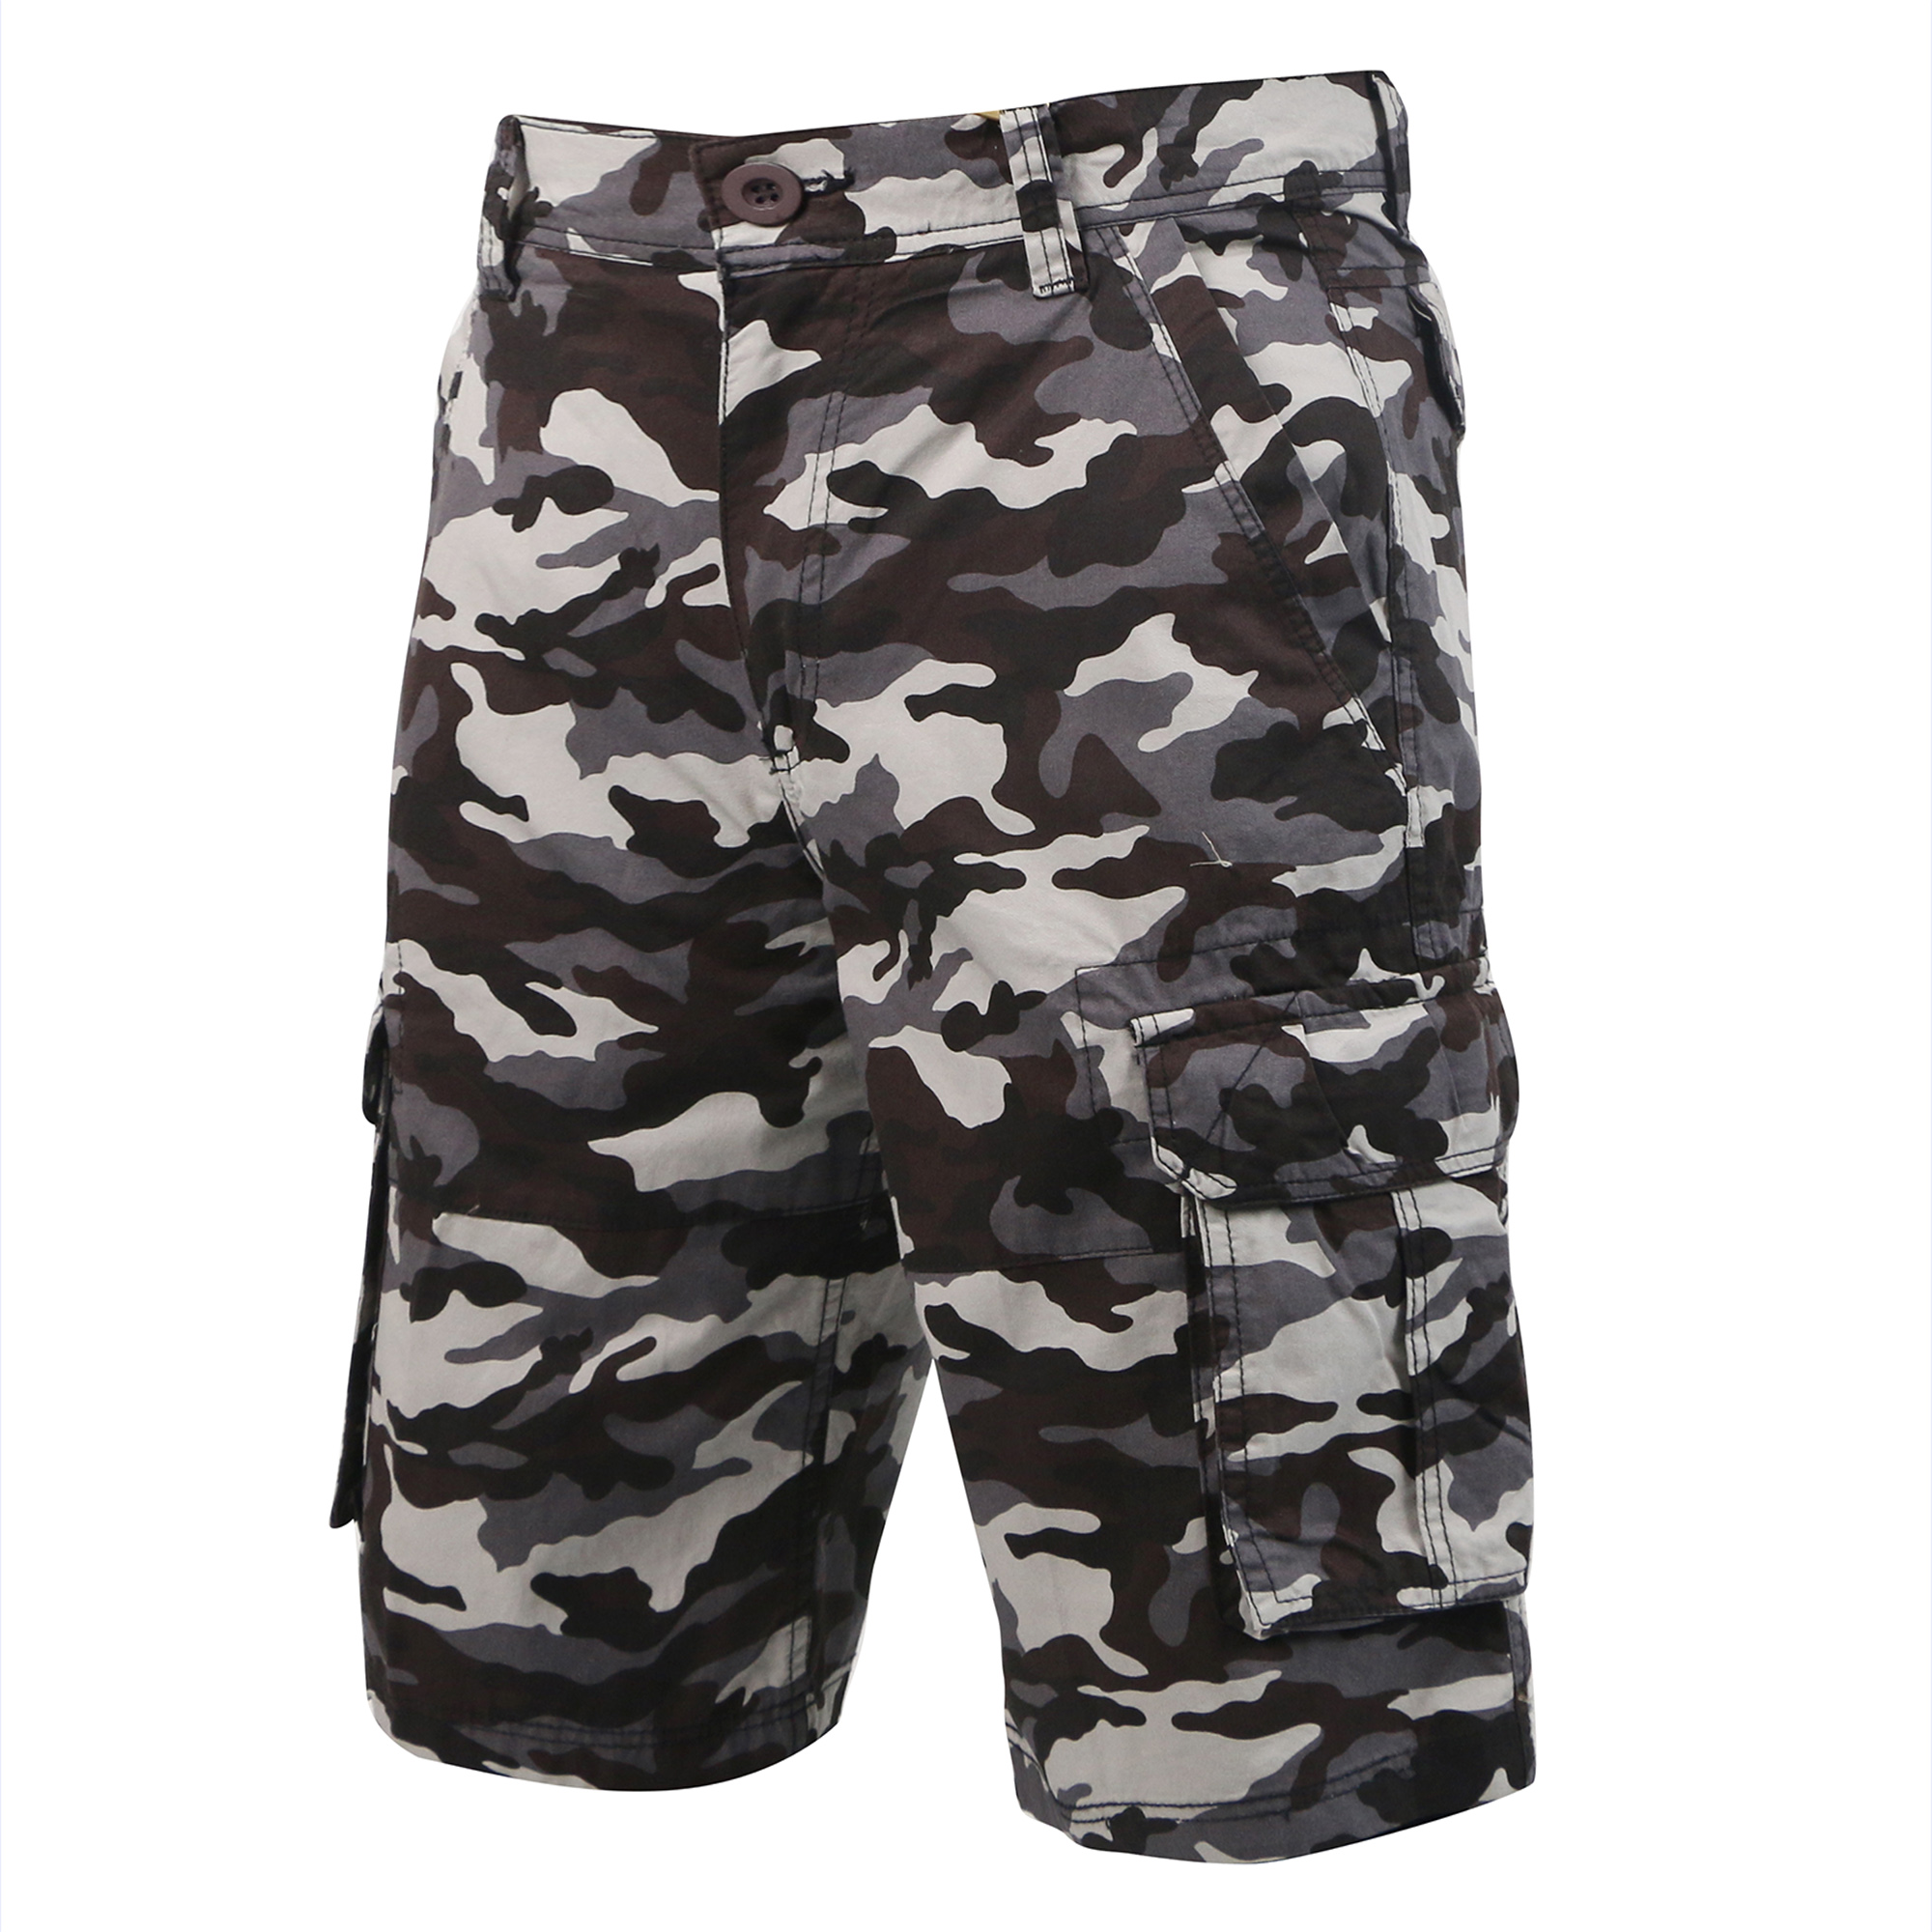 Men's Cargo Shorts Outdoor Multi-Pockets Relaxed Fit Cotton Camouflage ...